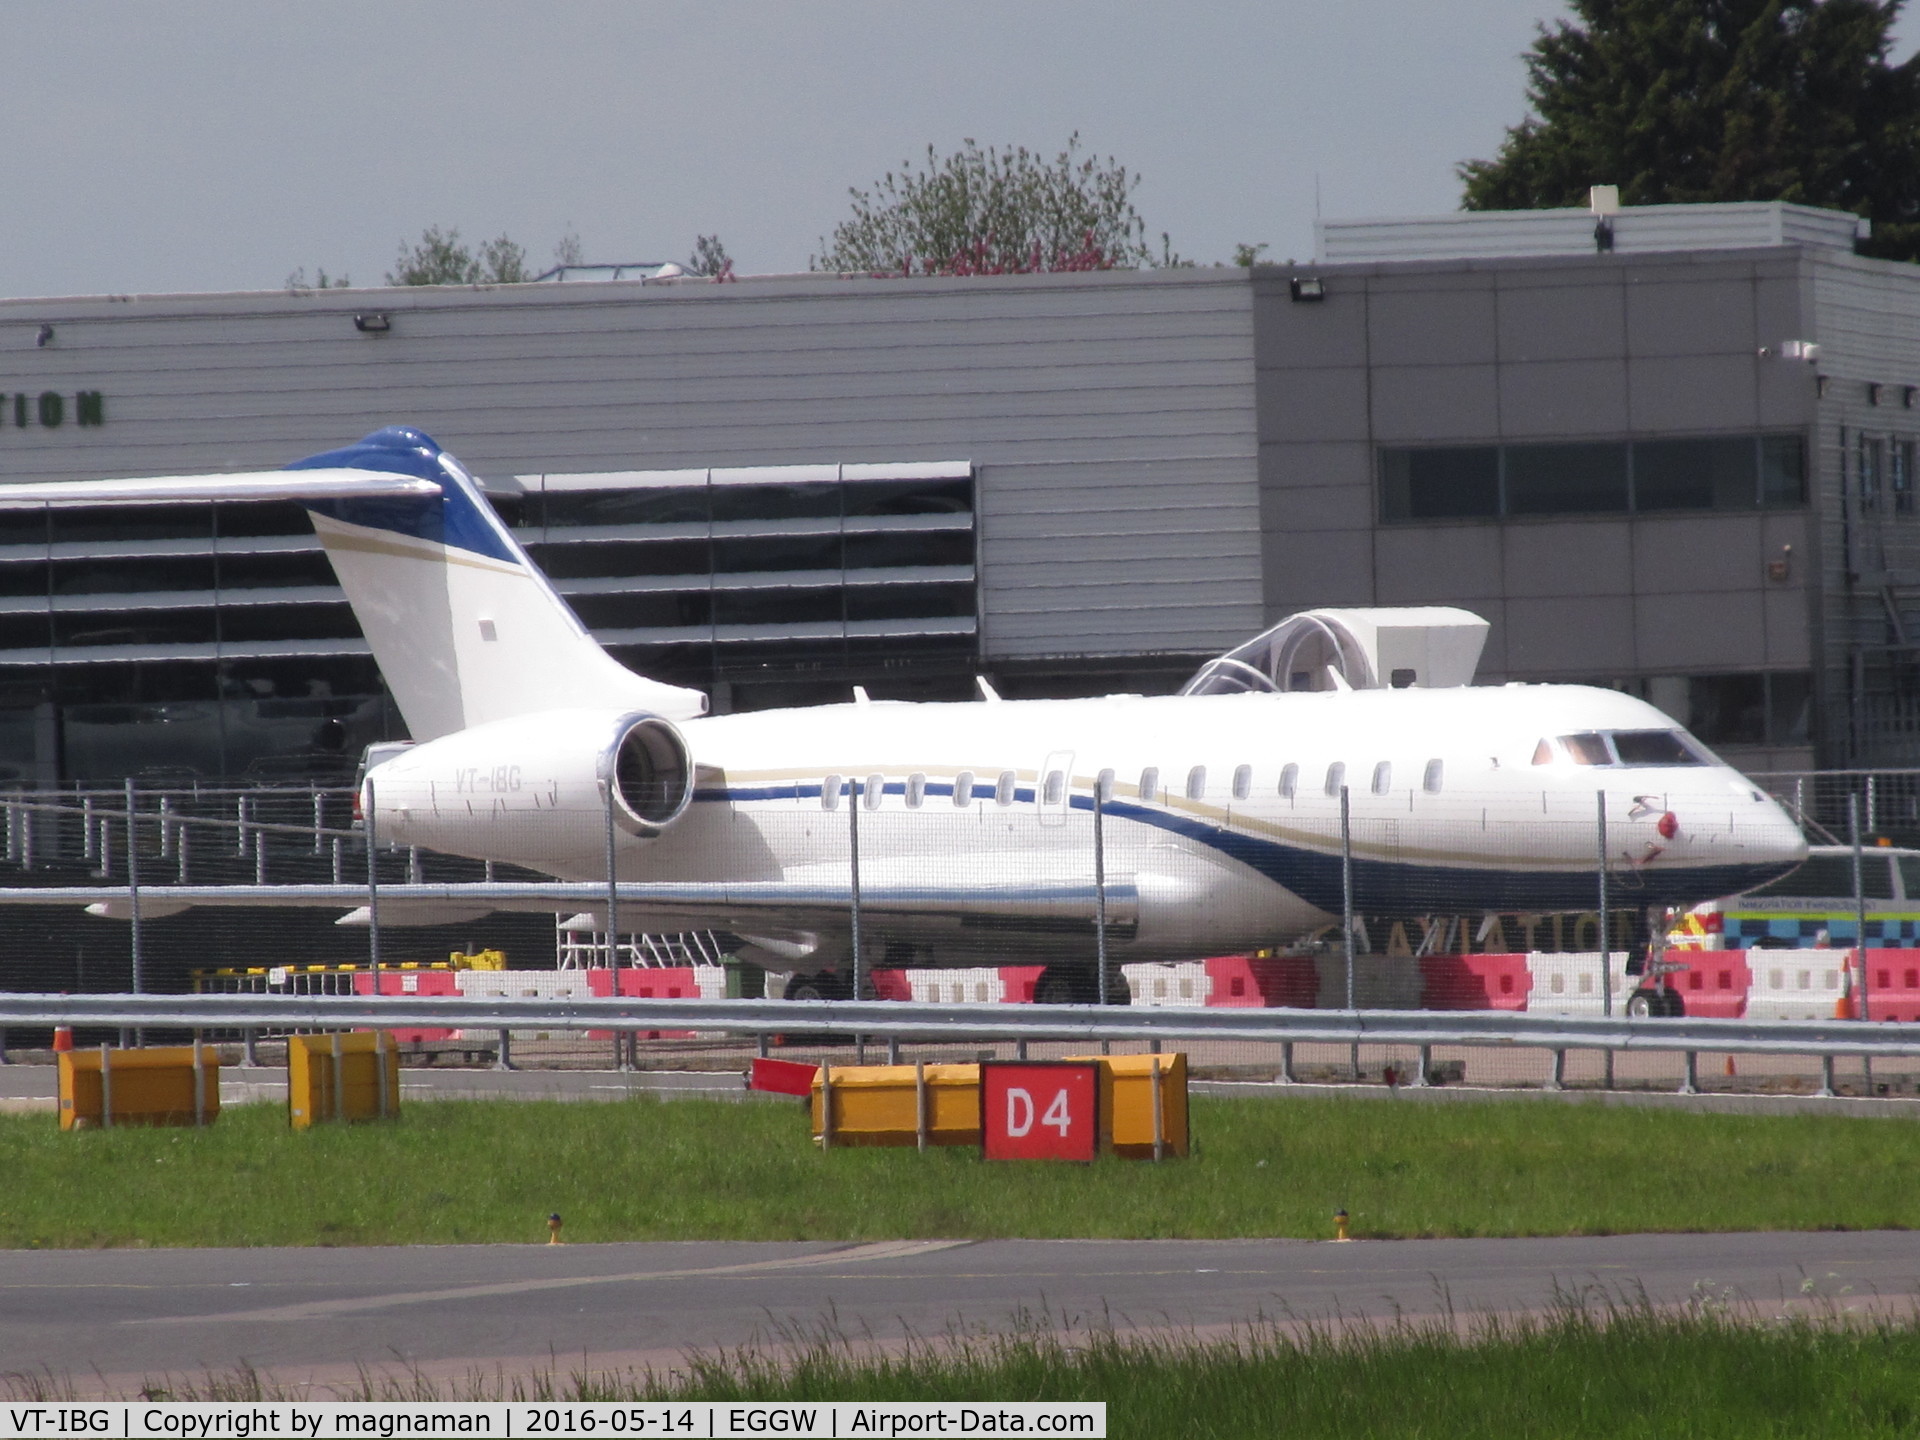 VT-IBG, 2014 Bombardier BD-700-1A10 Global Express C/N 9658, at luton along with three other vt- biz